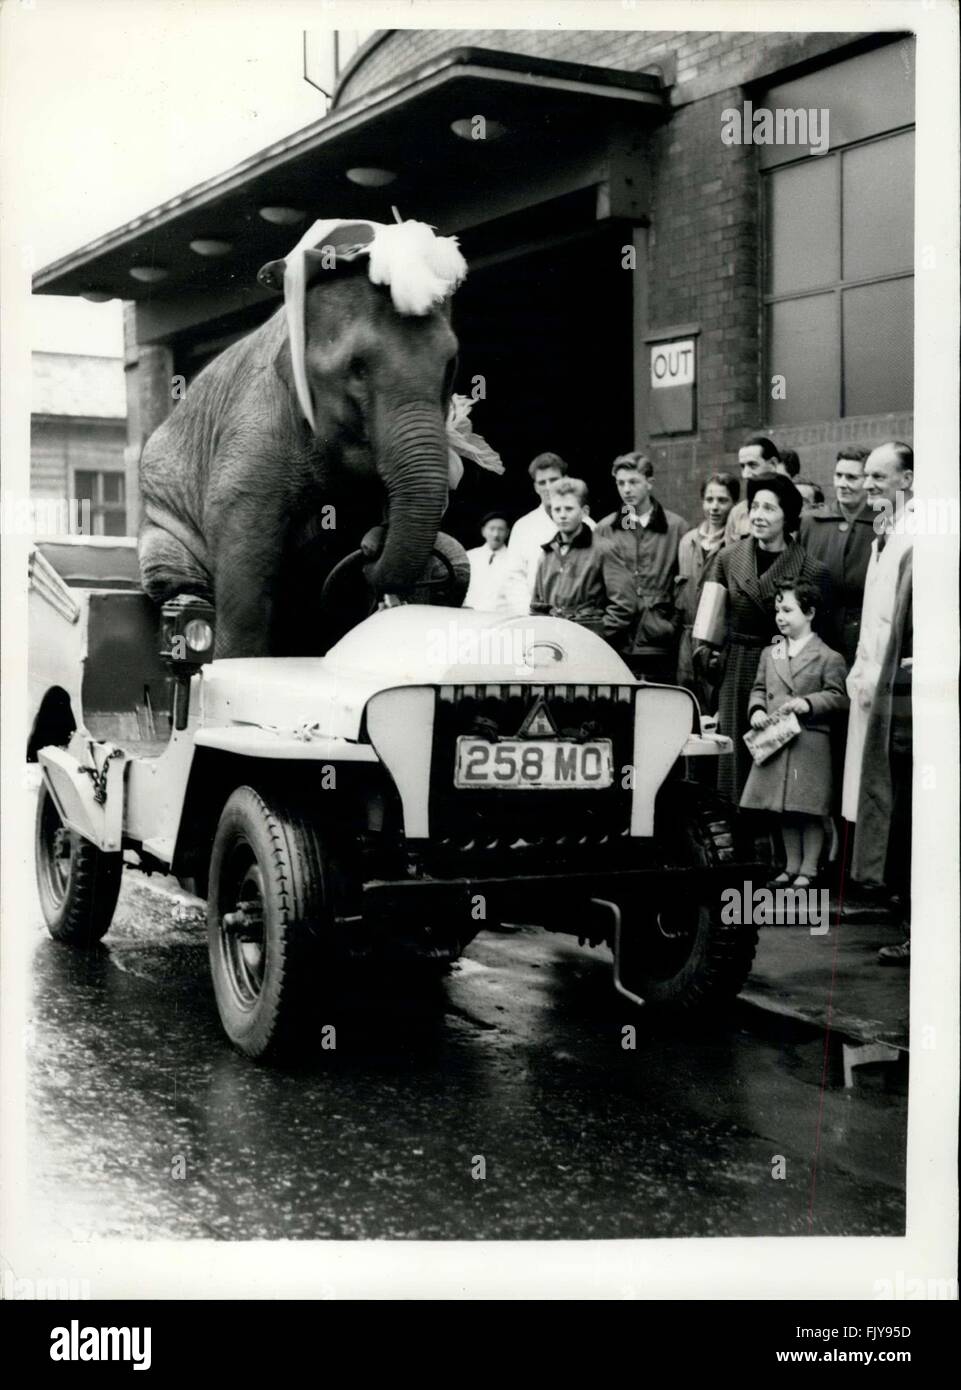 1952 - Animals Arrive For Bertram Mills Circus The Elephant Driver: Animals from the Bertram Mills winter quarters at Ascot - arrived by train at Addison Road Station today - for the Bertram Mills Circus, which opens at Olympia on December 20th. Photo shows ''Kam'' a four-year old elephant -amazed onlookers at Olympia today as he drove past at the wheel of a vehicle - and demonstrated his preess as a driver. The elephant drove in second gear. © Keystone Pictures USA/ZUMAPRESS.com/Alamy Live News Stock Photo